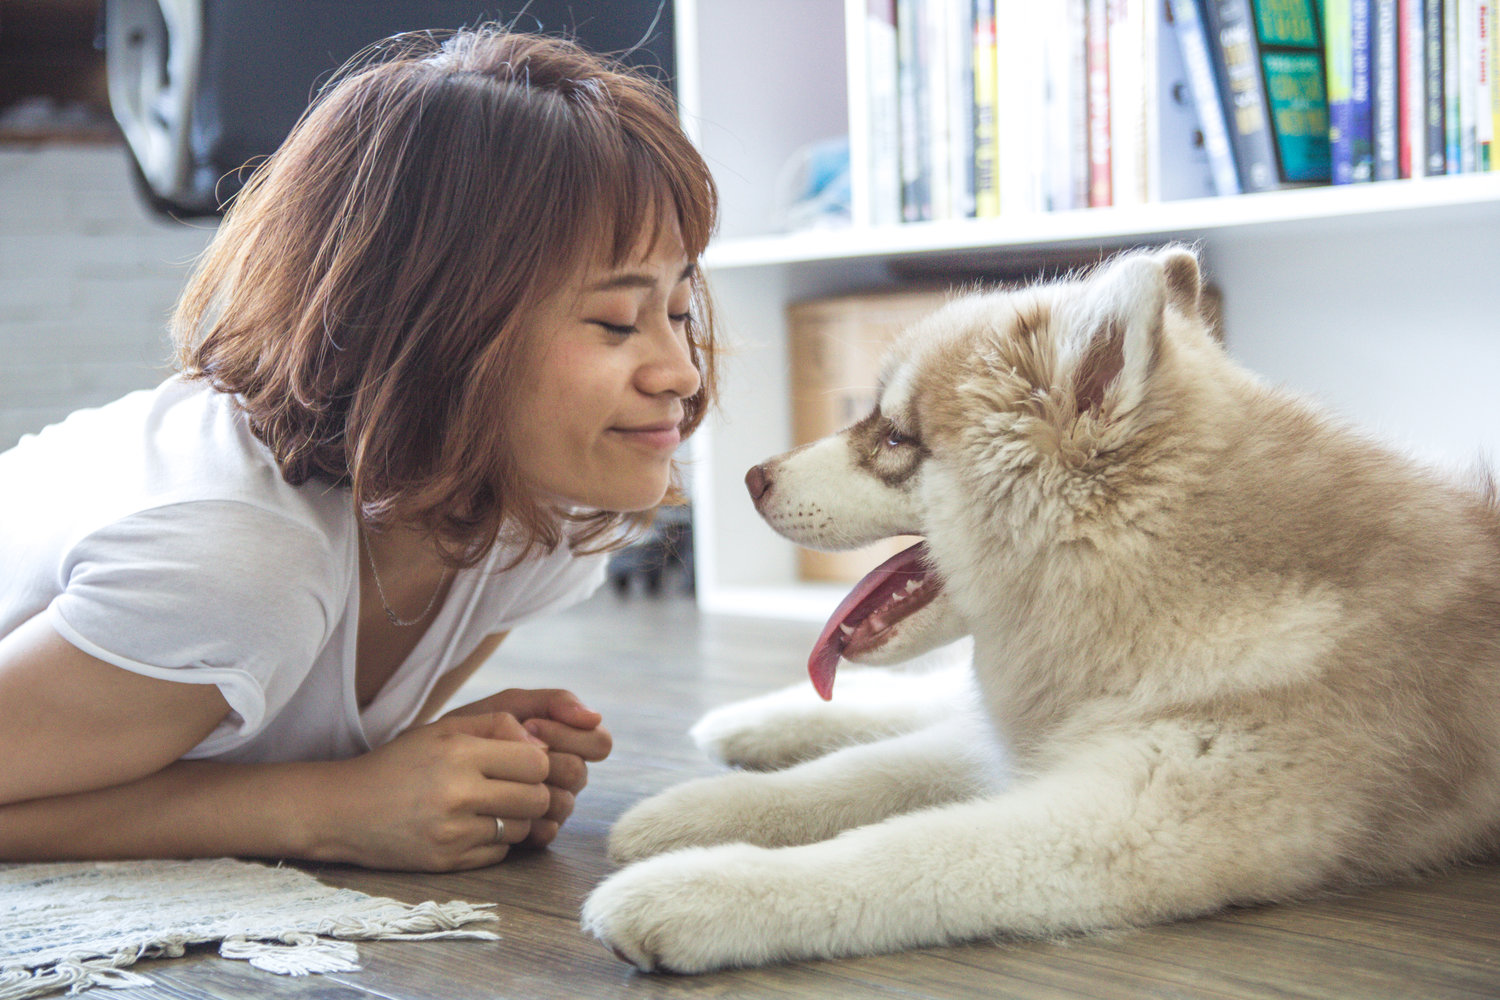 4 Ways Your Dog Benefits From Socialization